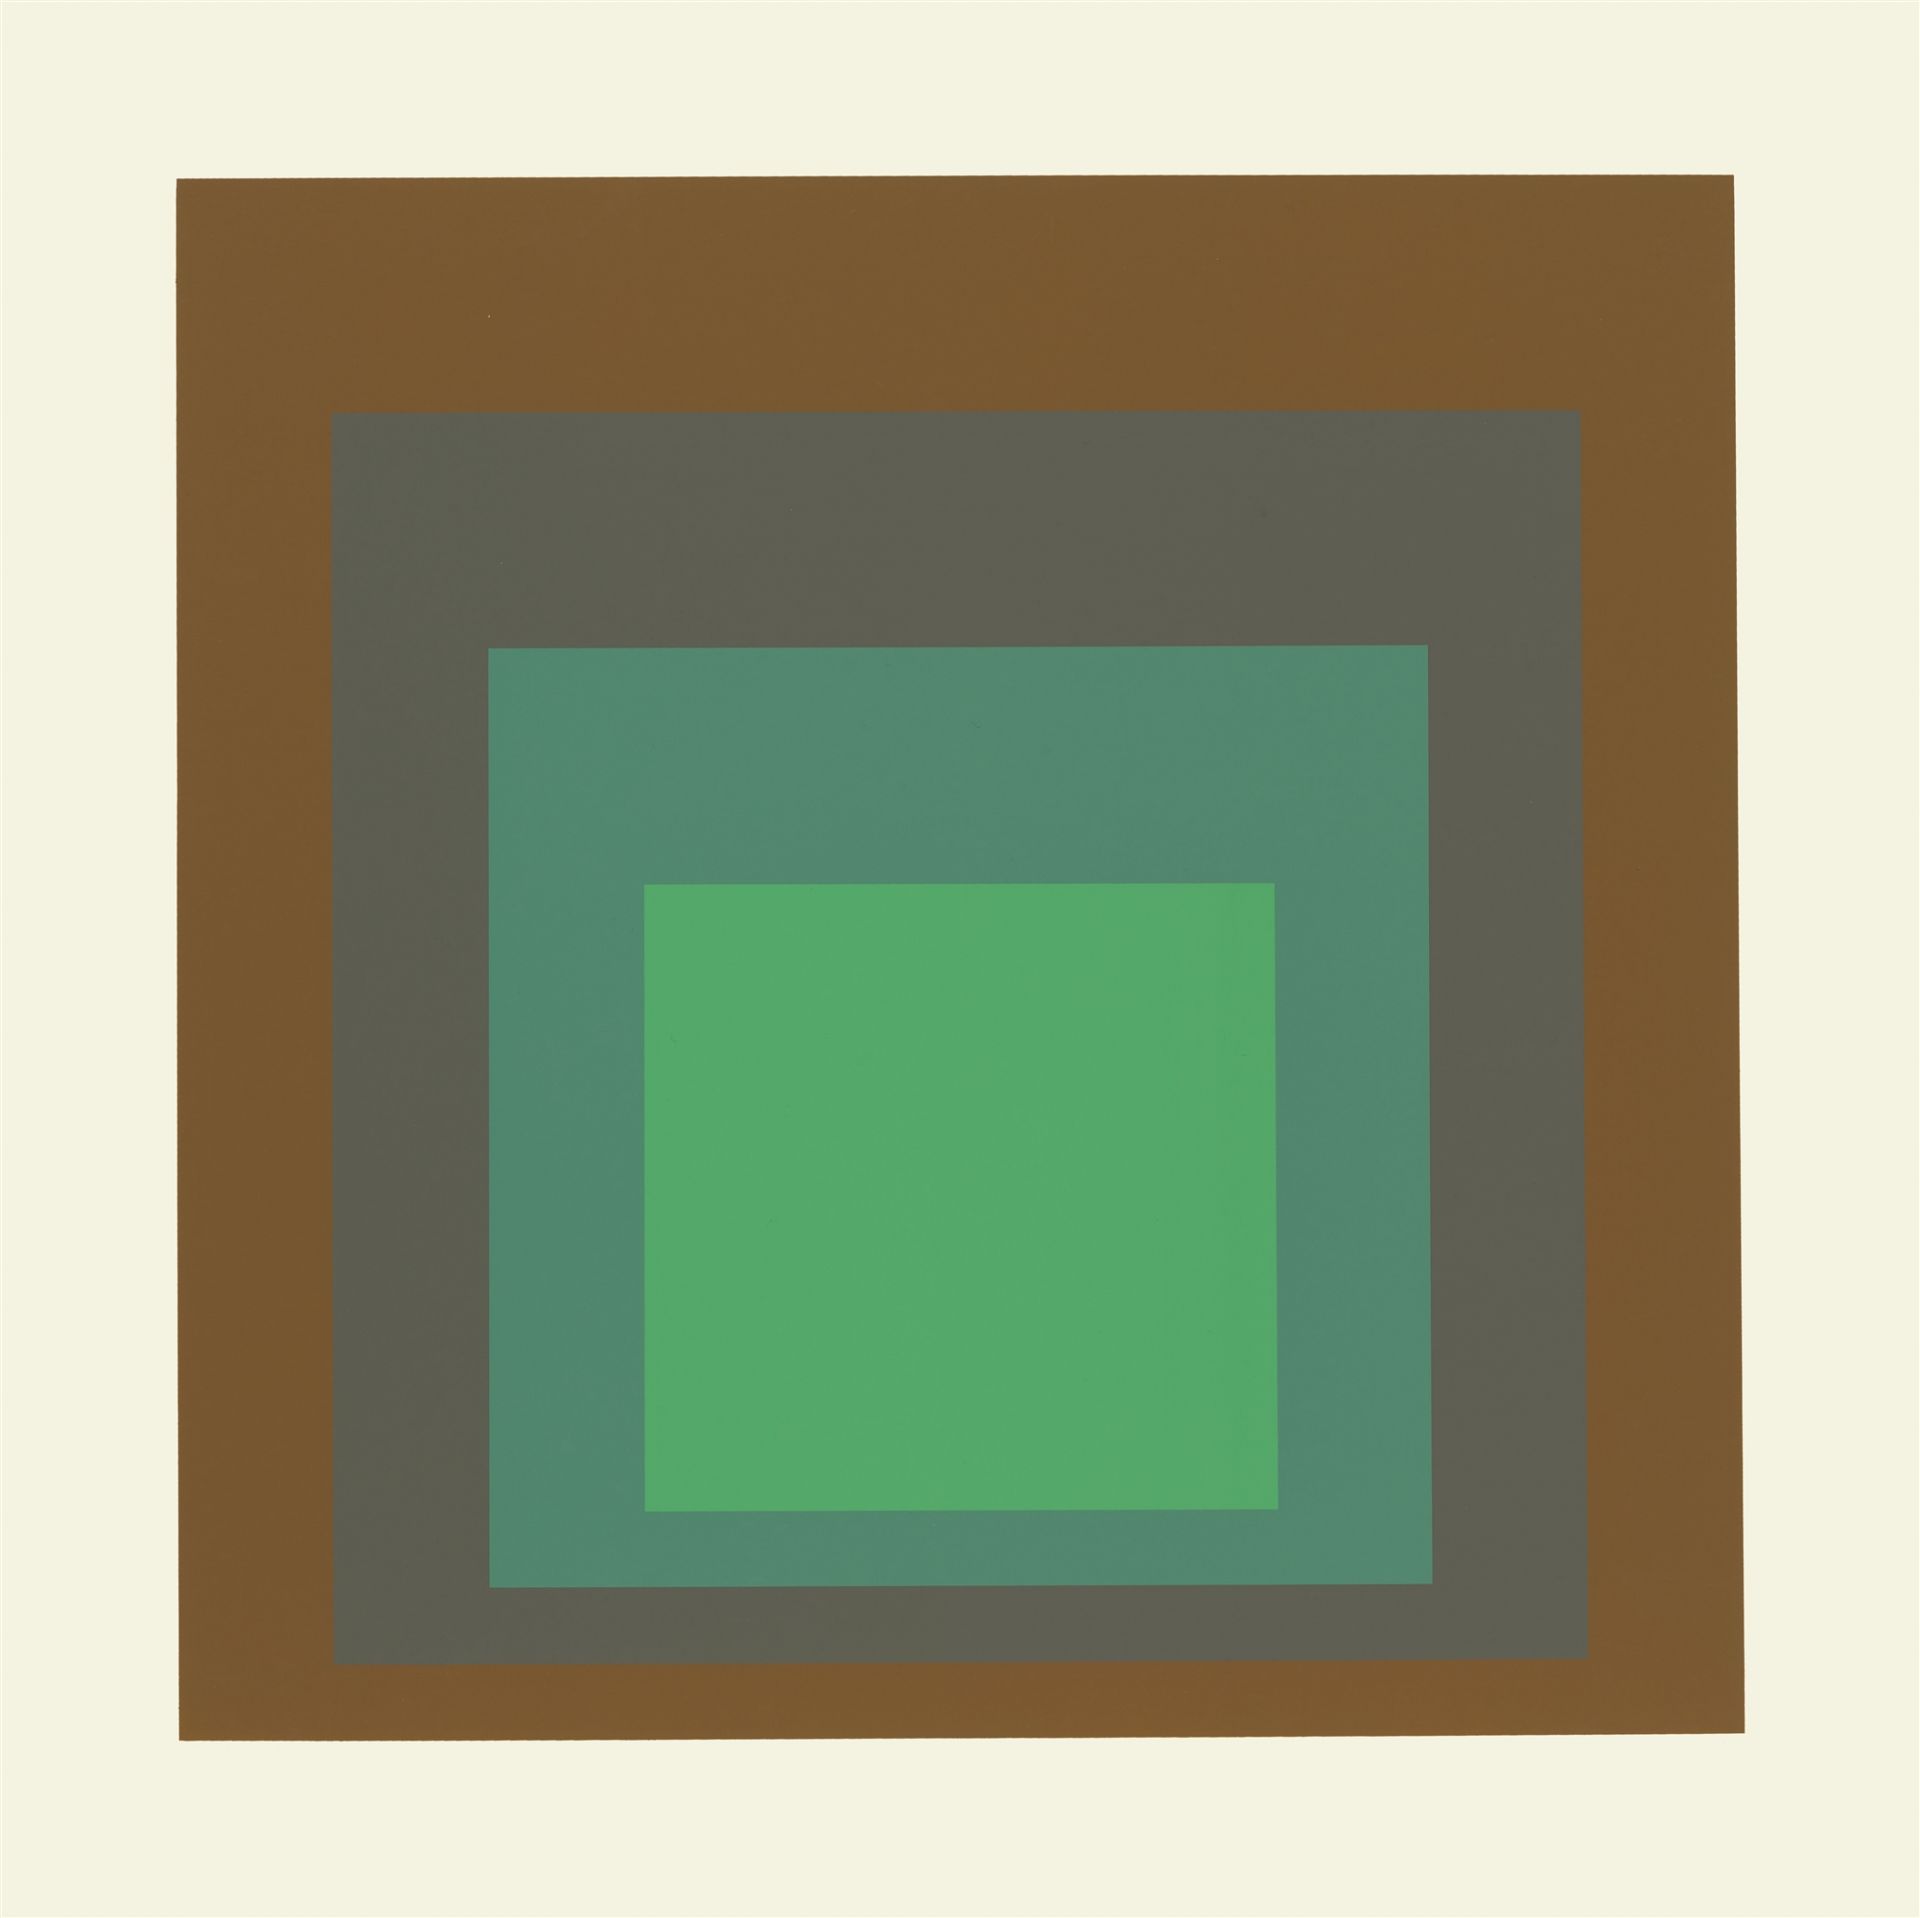 Josef Albers, SP (Homage to the Square) - Image 9 of 13